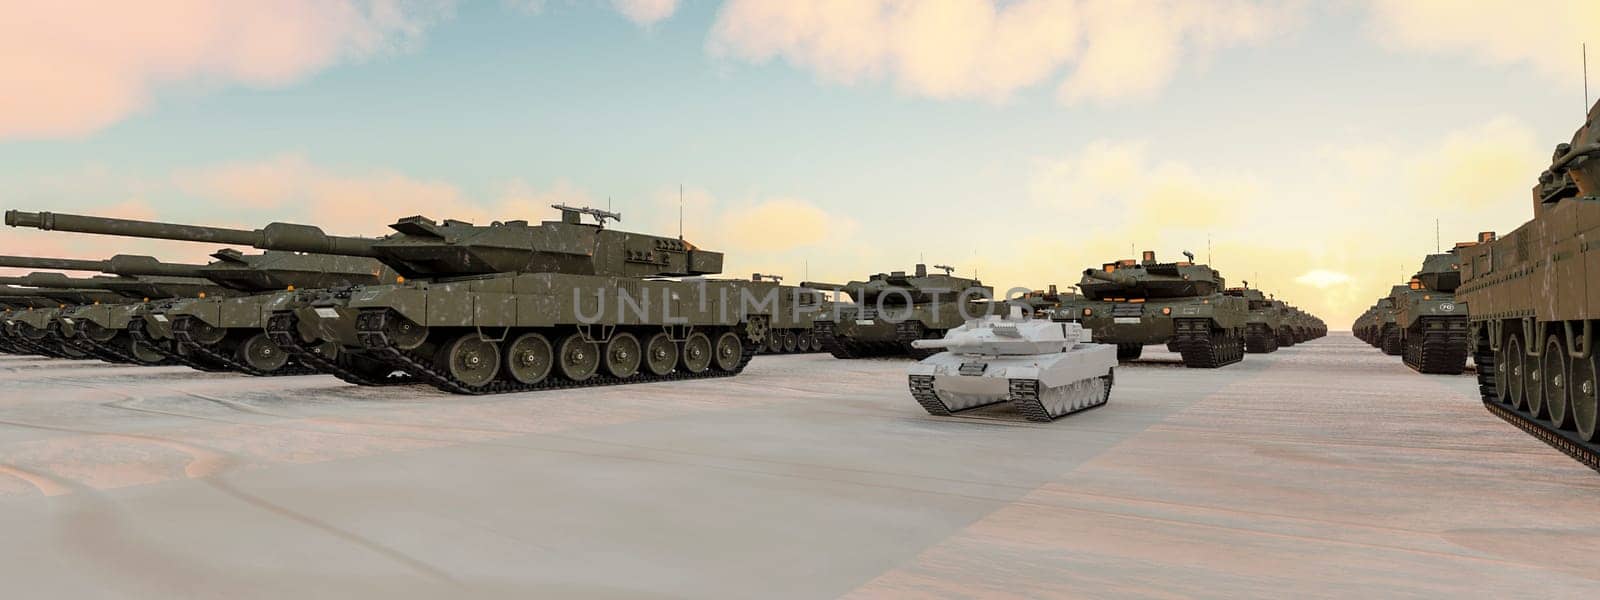 Iron Guardians on Ice: Tank Battalion in Winter Camouflage Ready for Maneuvers by Juanjo39